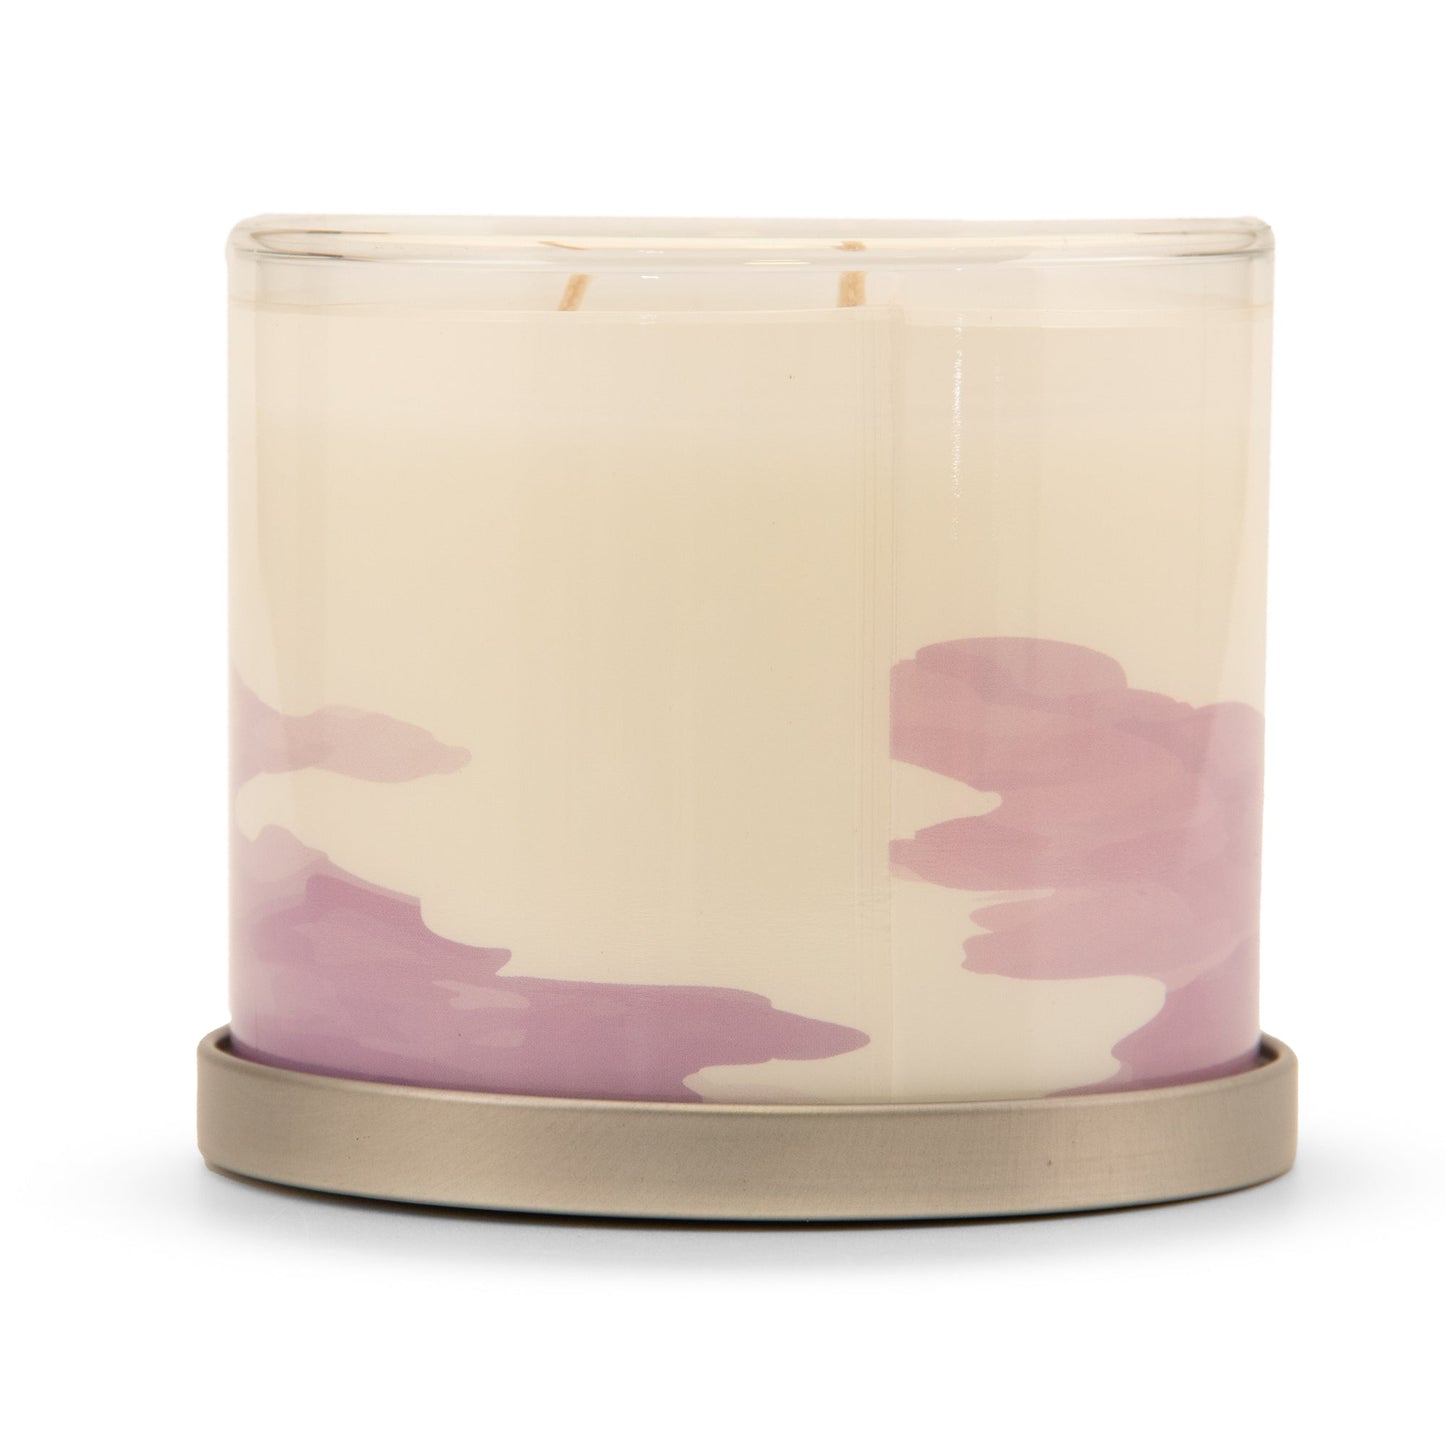 Pier 1 Spa Collection Sea Salt & Lavender Filled 3-Wick Candle - The Home Resolution